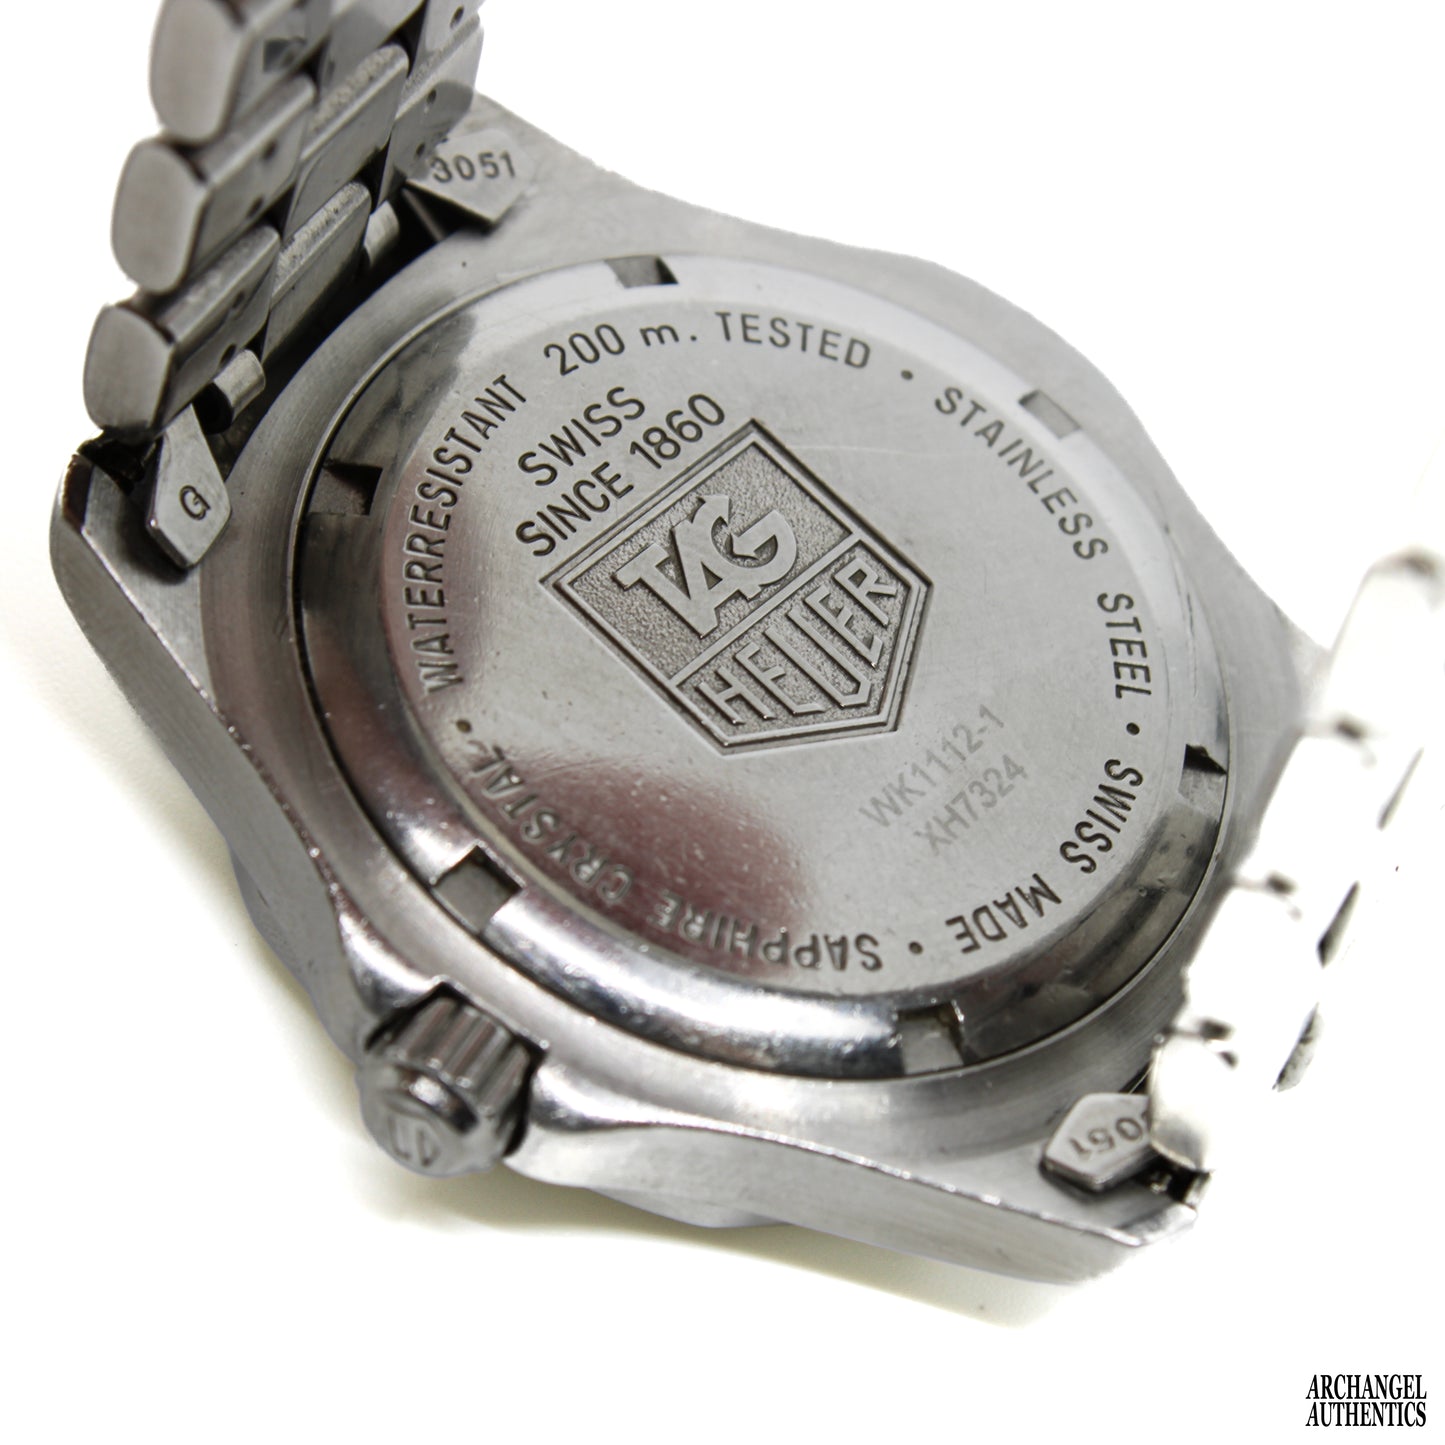 Tag Heuer Professional 200 Silver Dial